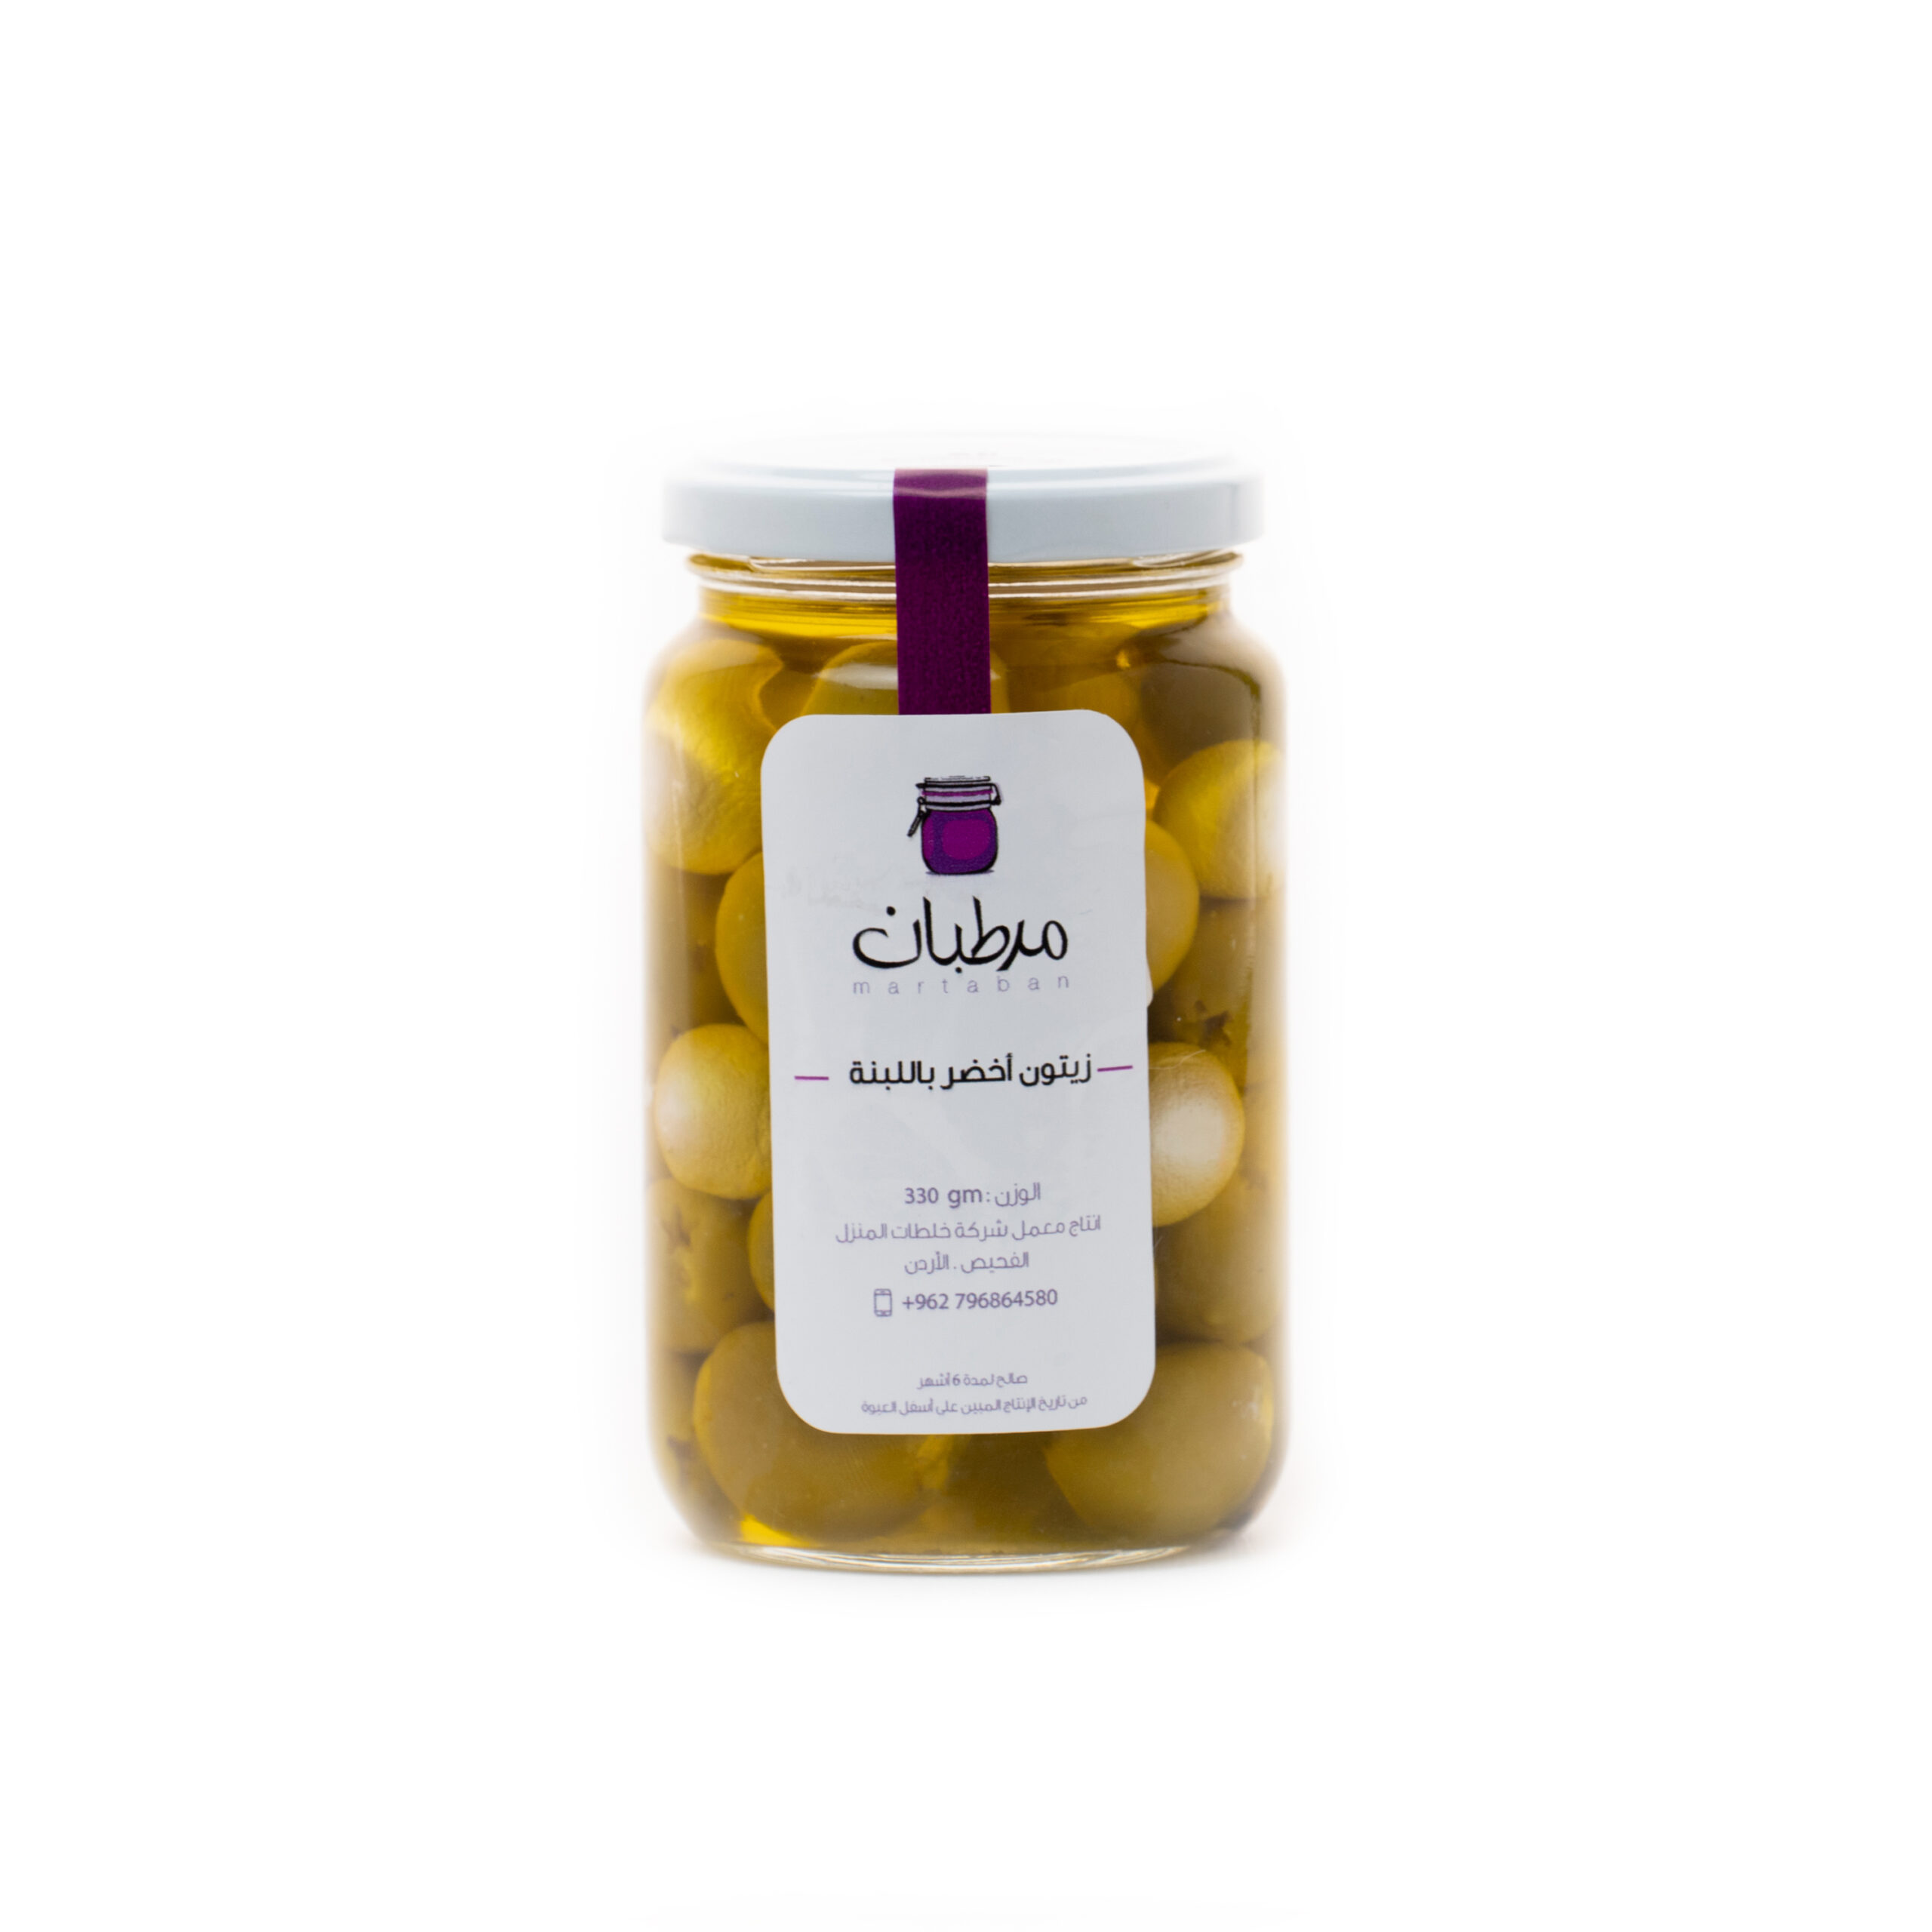 Green olives filled with labneh